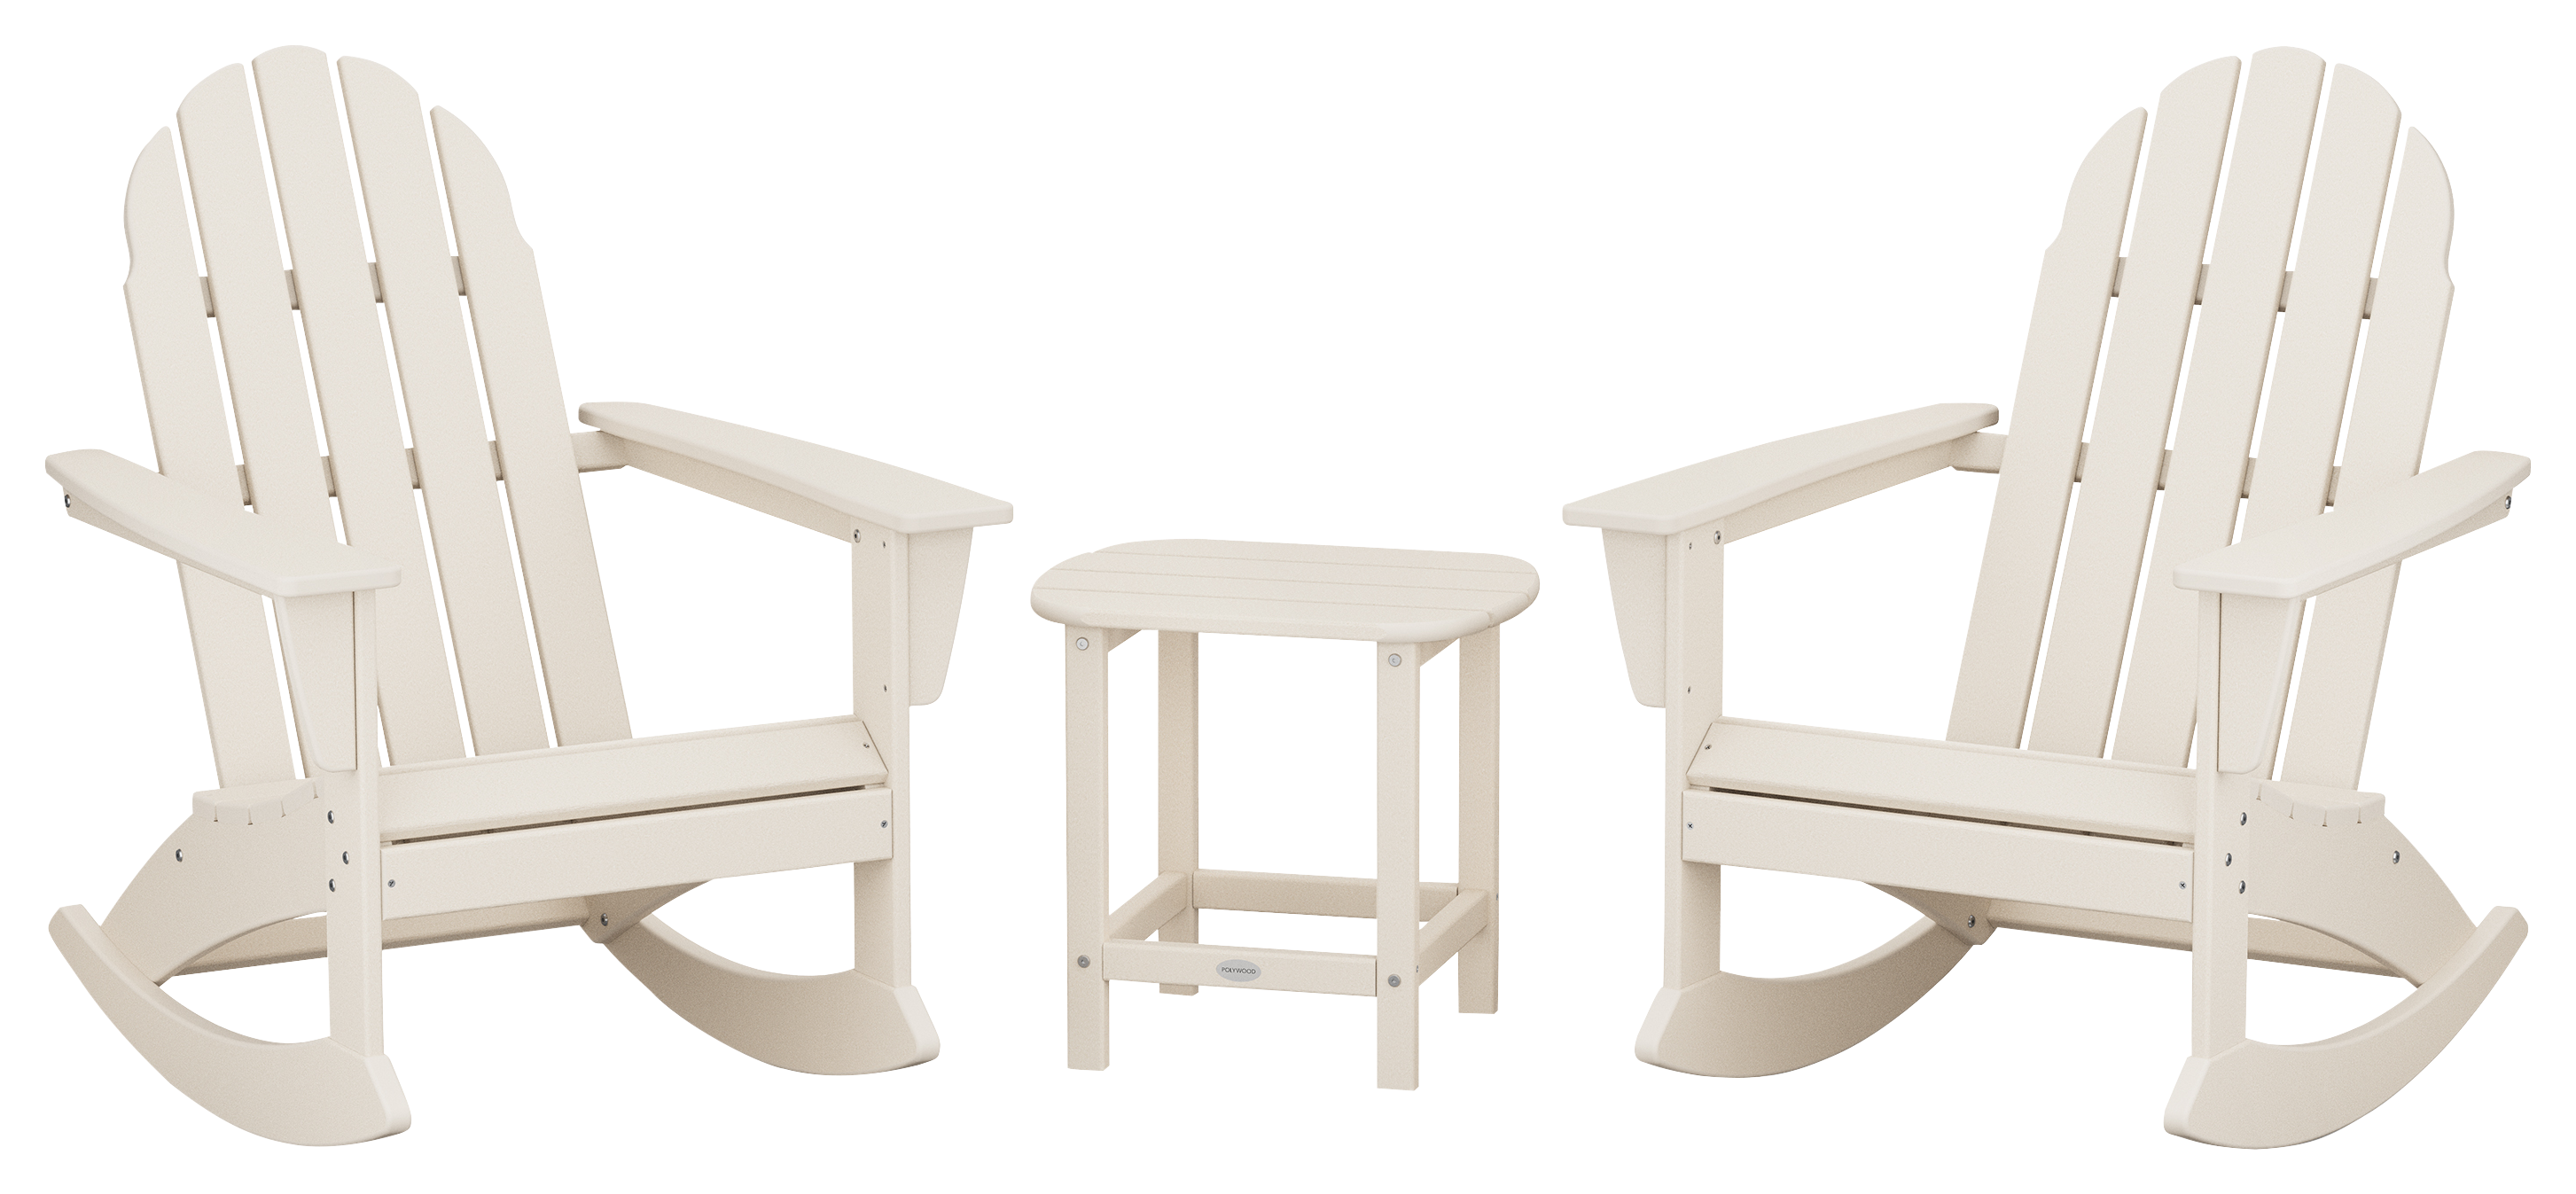 POLYWOOD Vineyard 3-Piece Adirondack Rocking Chair Set with South Beach Side Table - Sand